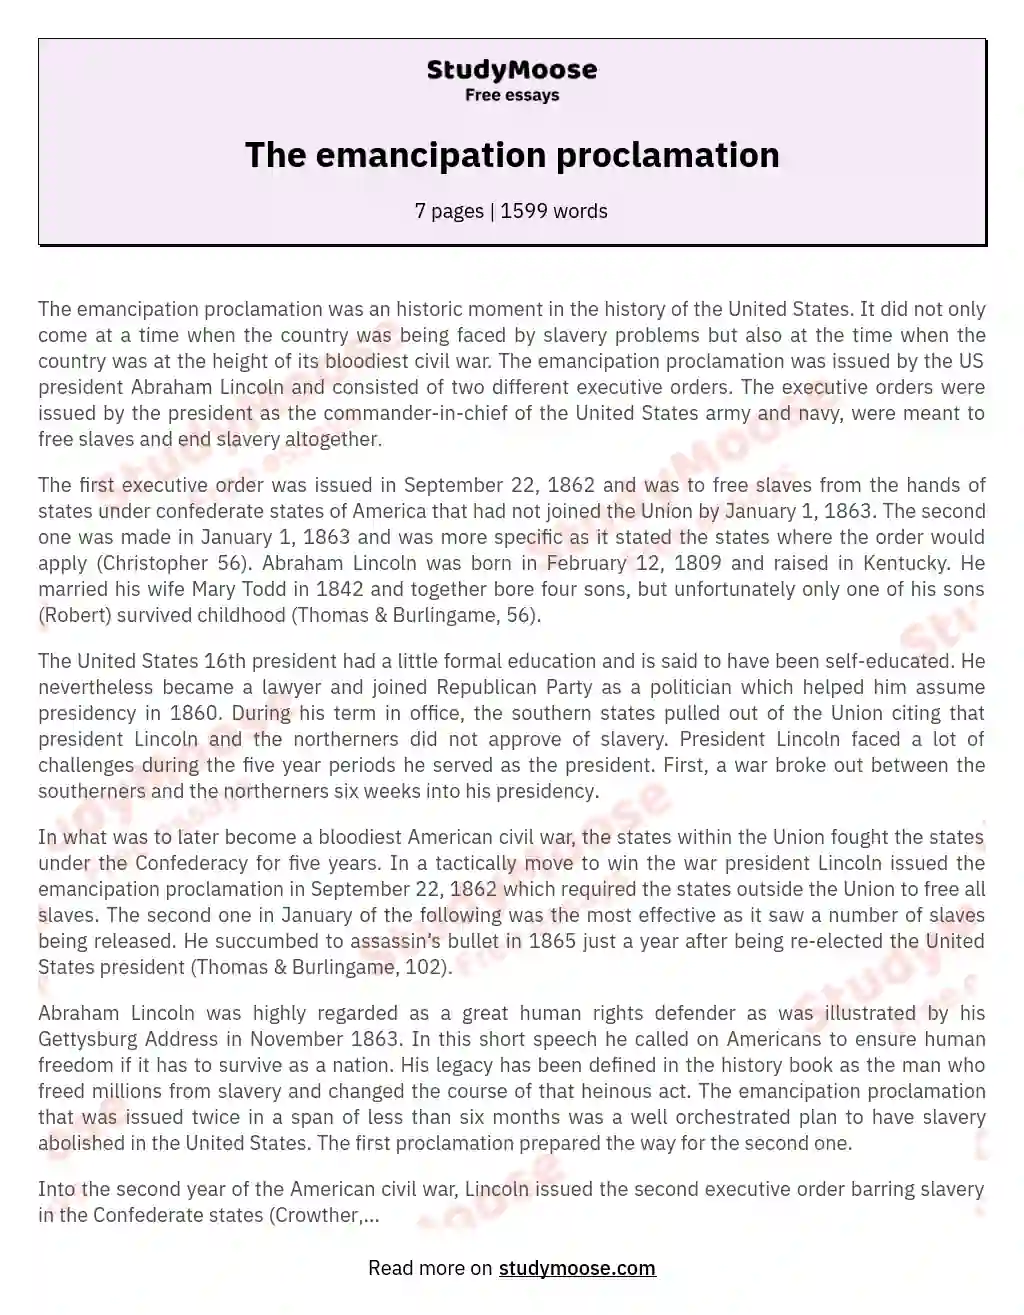 what is emancipation proclamation essay